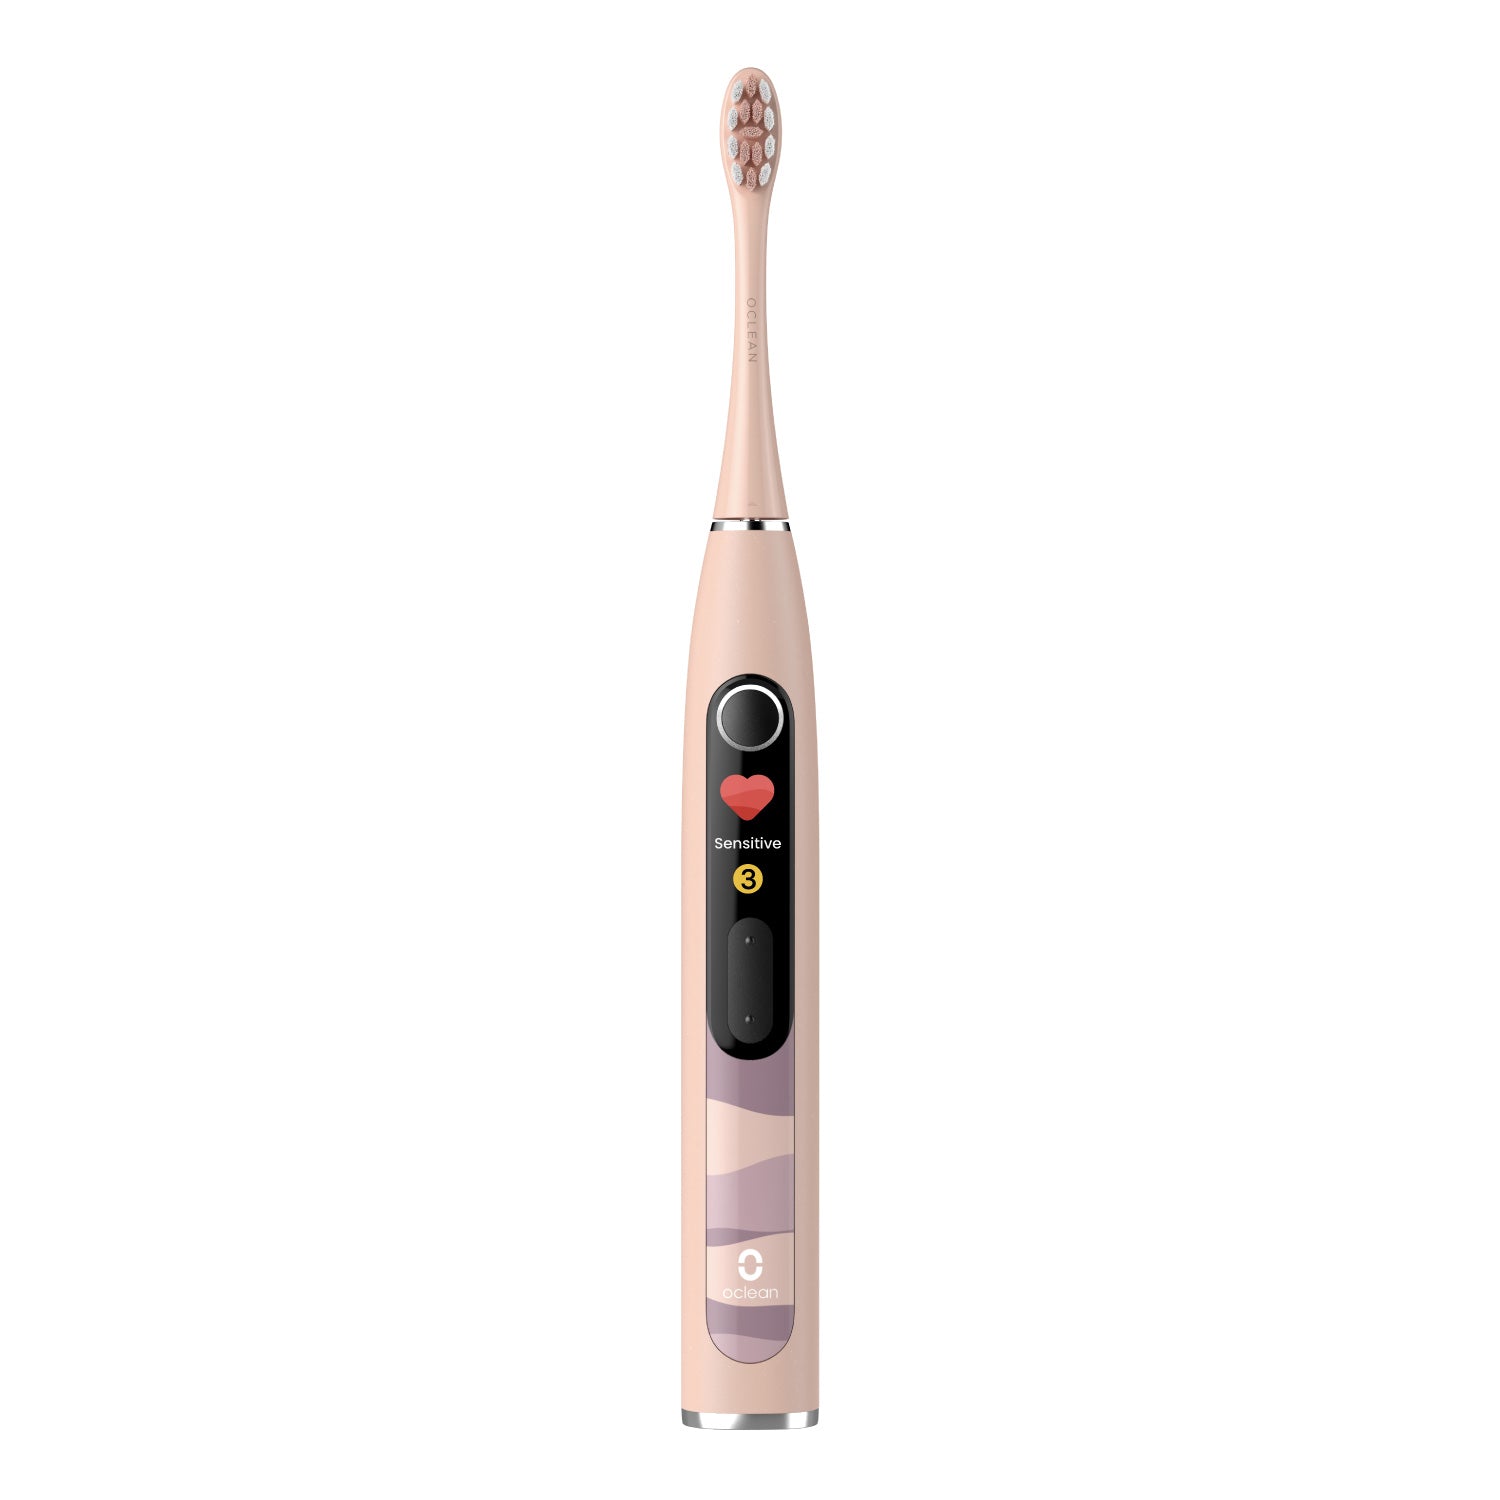 Oclean X10 Smart Electric Toothbrush-Toothbrushes-Oclean Global Store